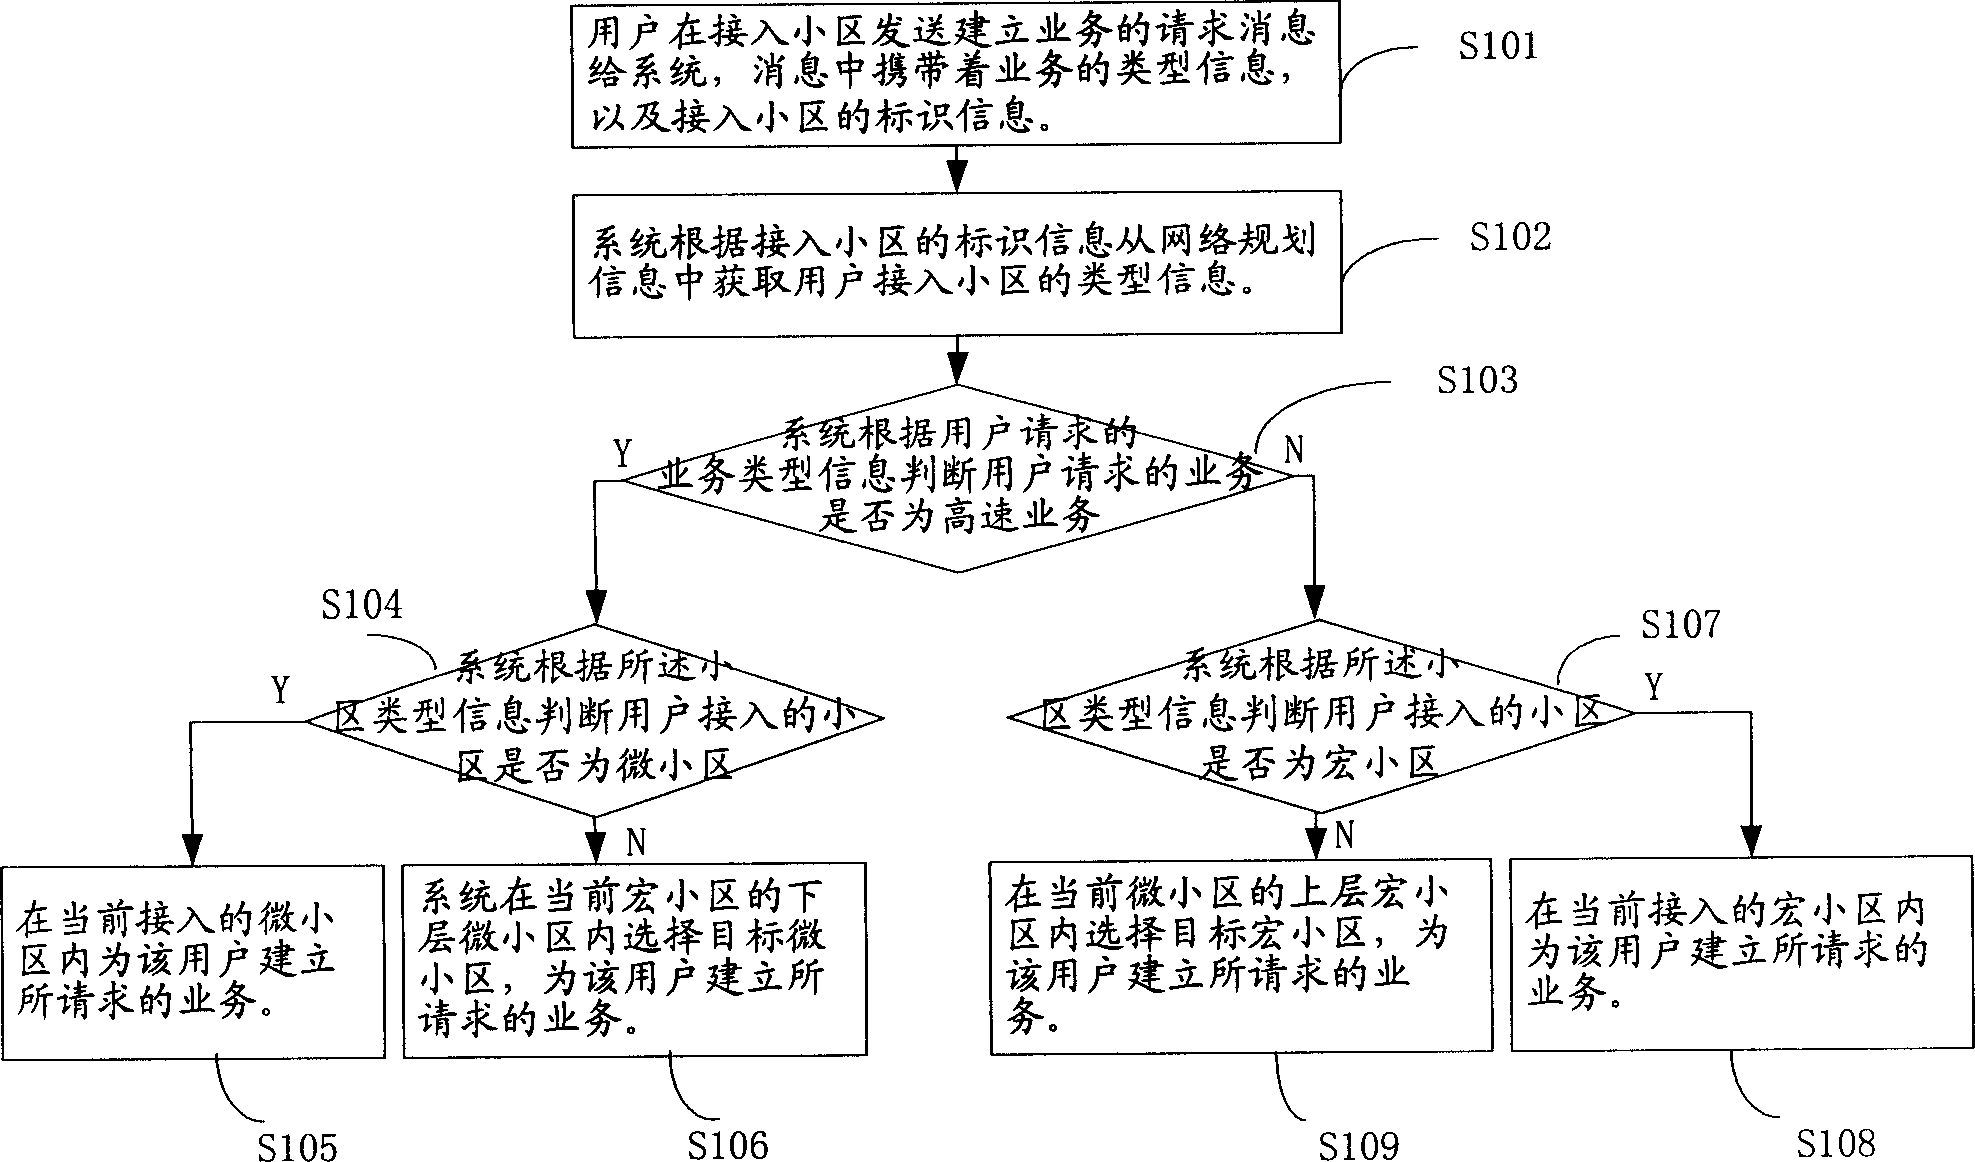 Method for service allocation in layered network